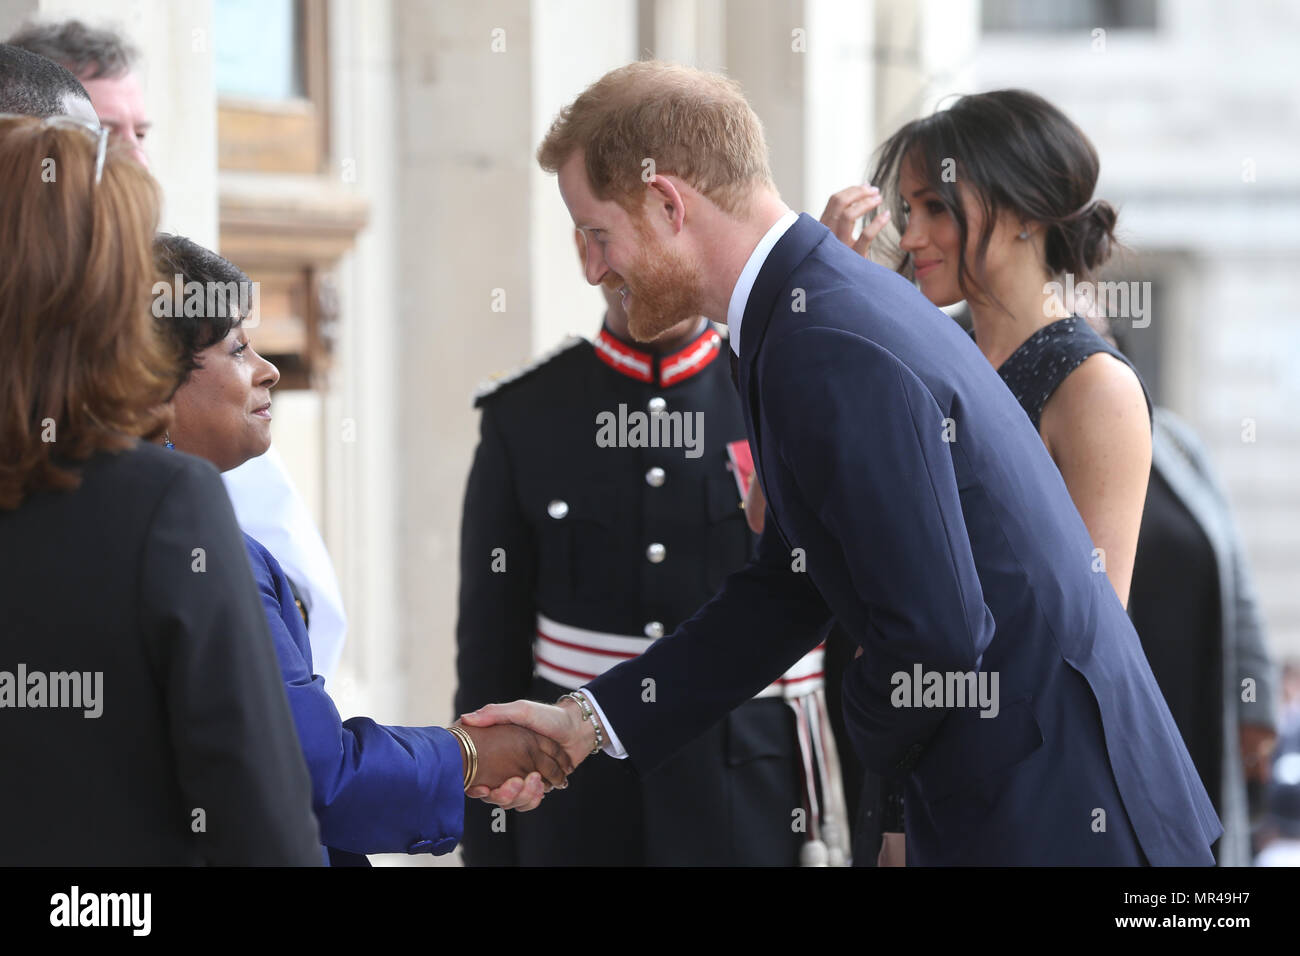 Memorial service to celebrate the life and legacy of Stephen Lawrence, at St Martin-in-the-Fields, Trafalgar Square, London.  Featuring: Prince Harry, Meghan Markle, Doreen Lawrence, Baroness Lawrence of Clarendon Where: London, United Kingdom When: 23 Apr 2018 Credit: WENN.com Stock Photo